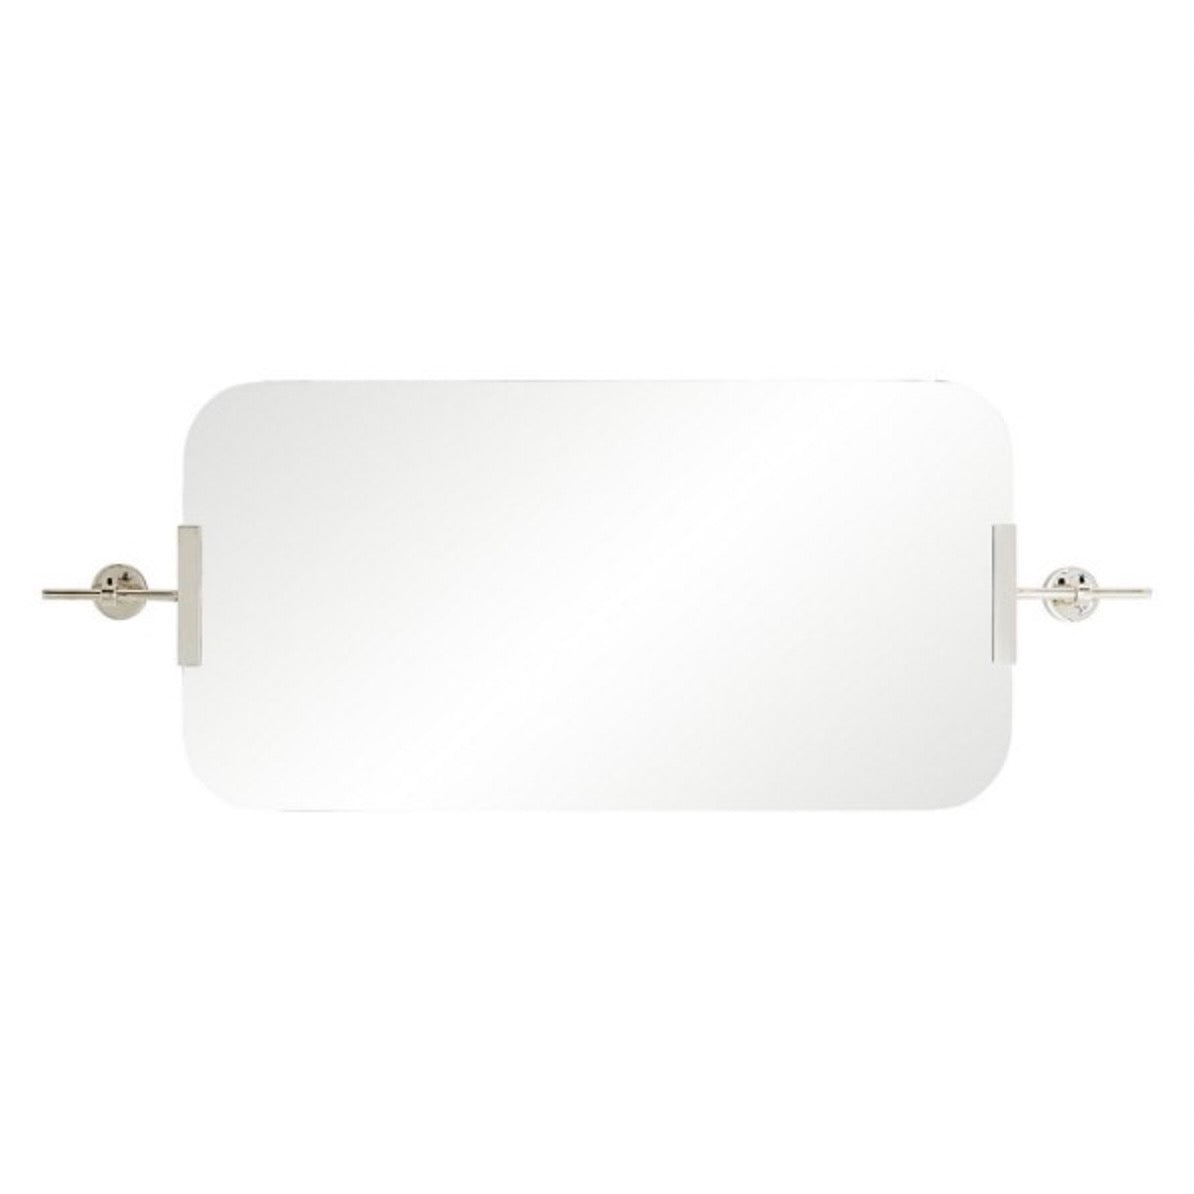 Arteriors Home | Madden Mirror 19W x 48H in Polished Nickel